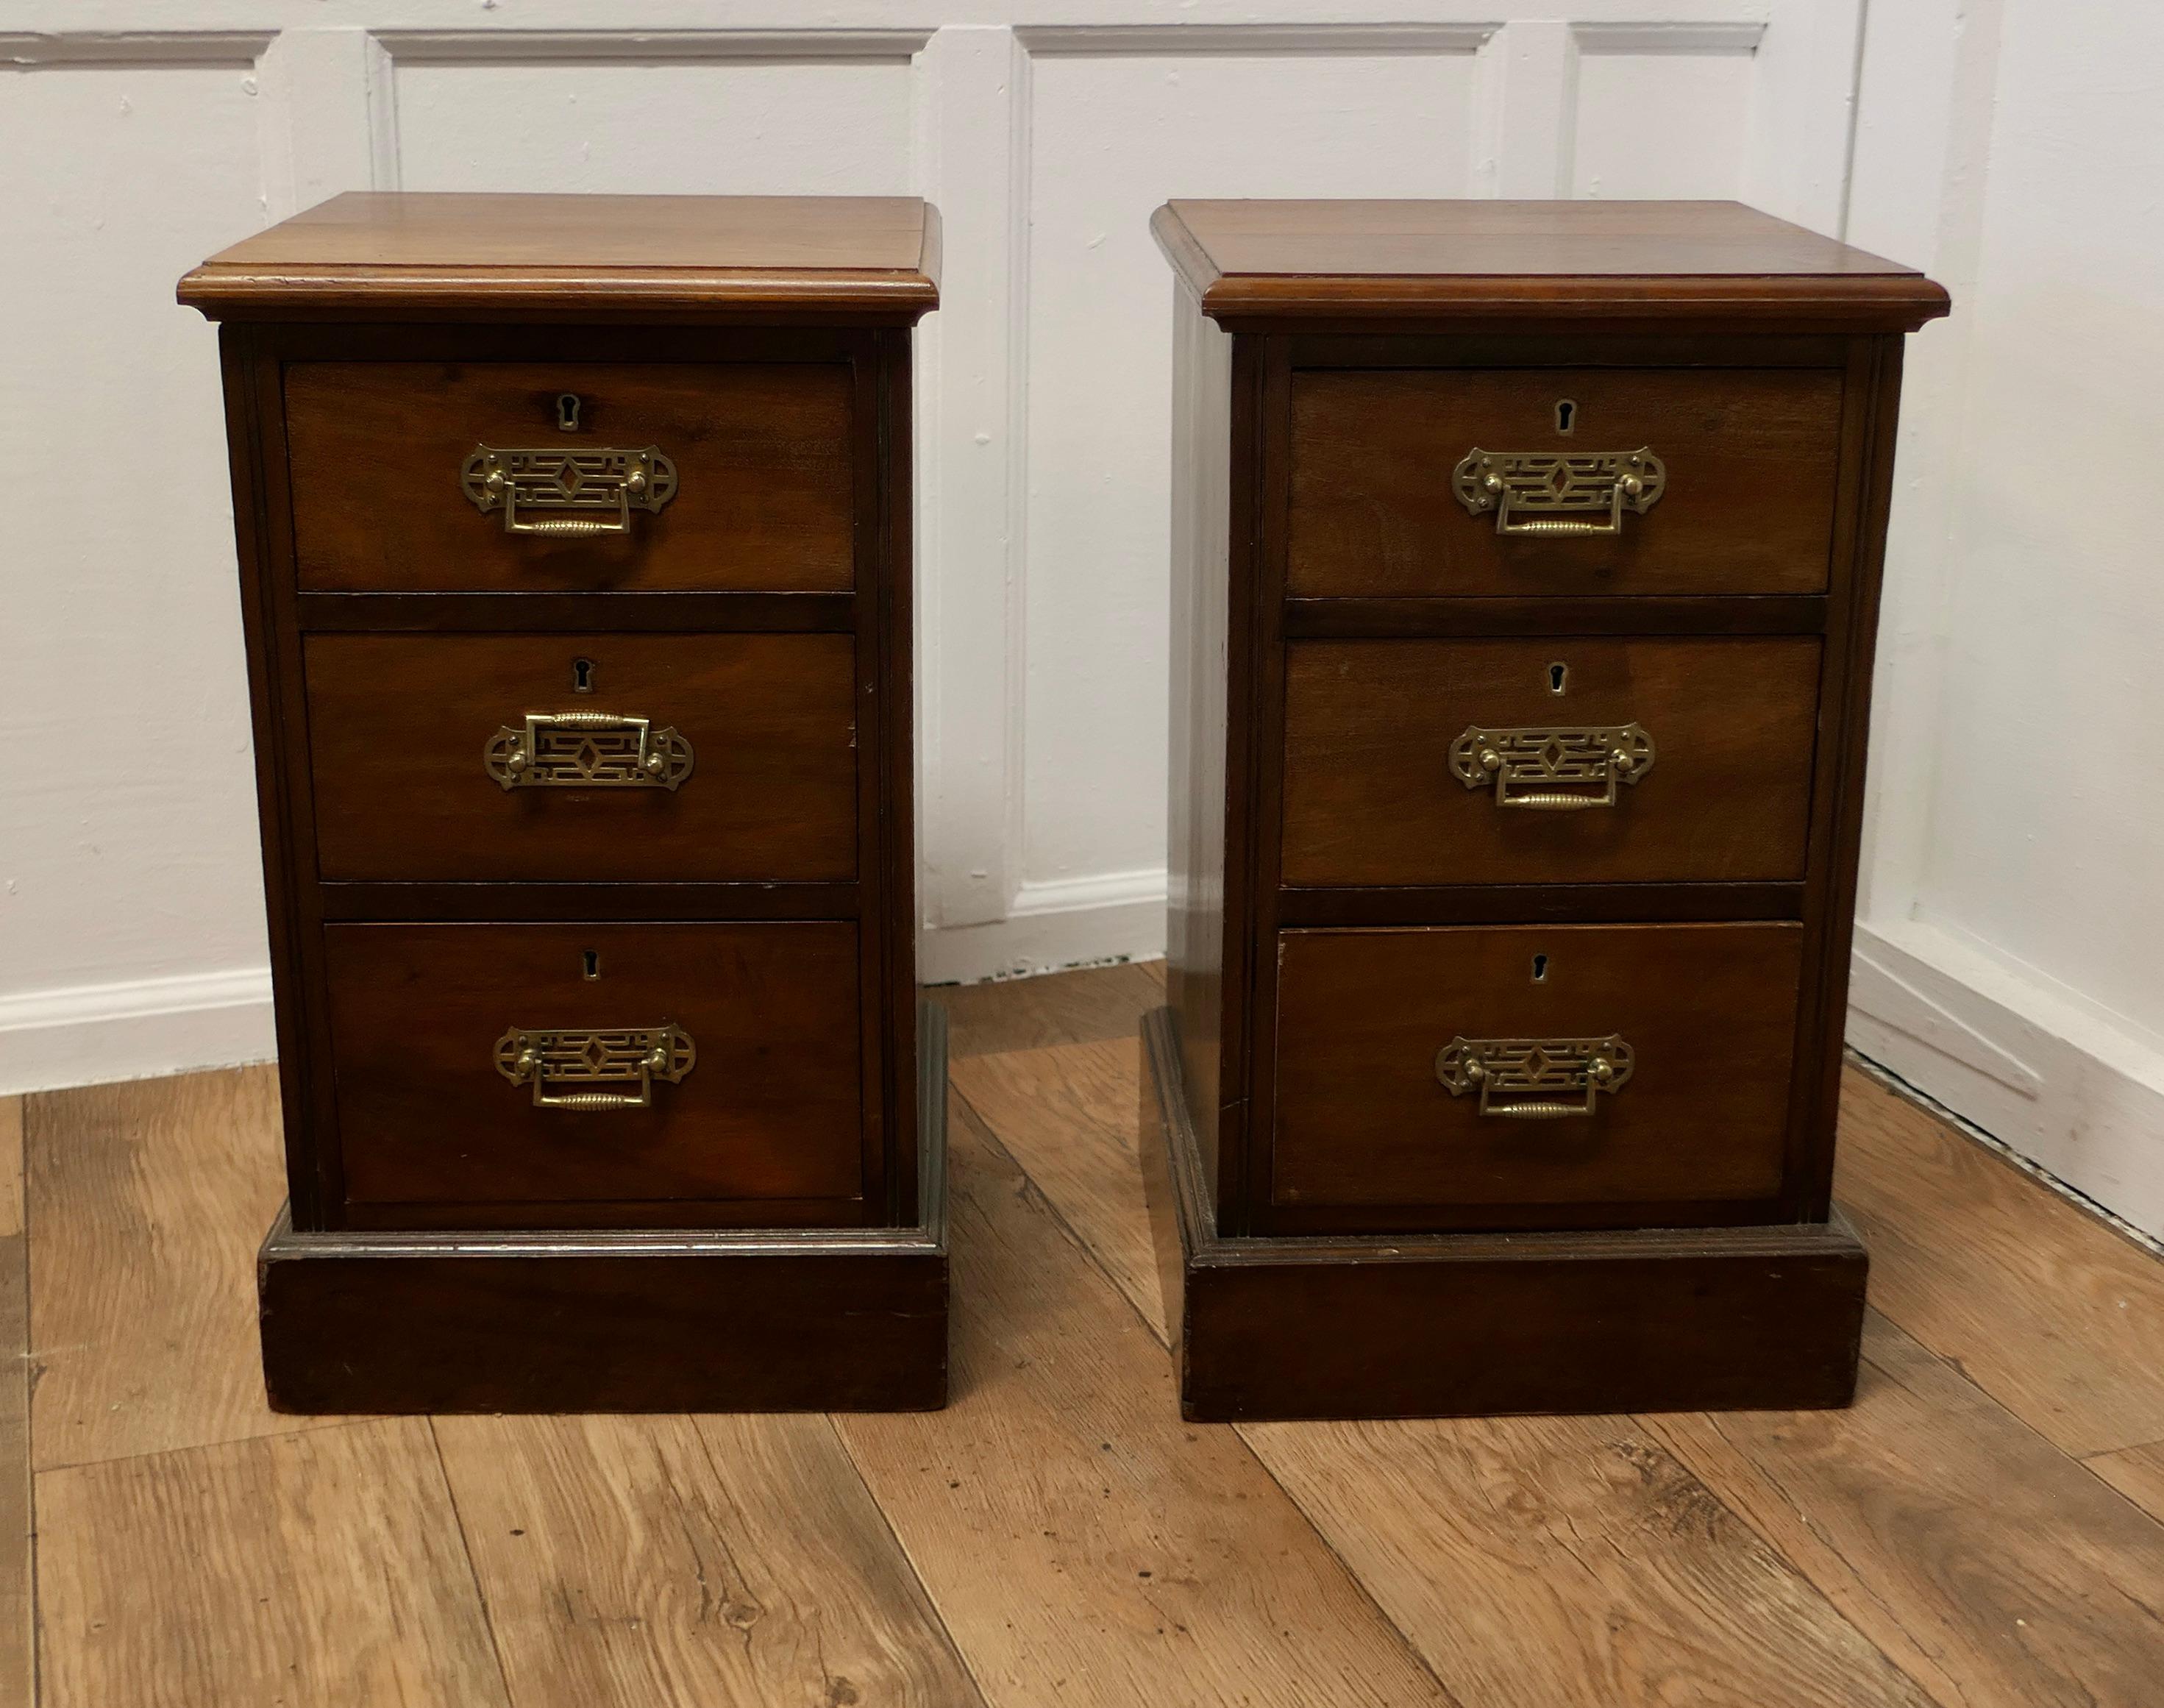 A Pair of Small 4 drawer Chest of Drawers, Night Tables

These are wonderful little chests, they each have 4 drawers and brass handles
The drawers run very smoothly and they each stand on a small plinth with an attractive moulded edge to the top